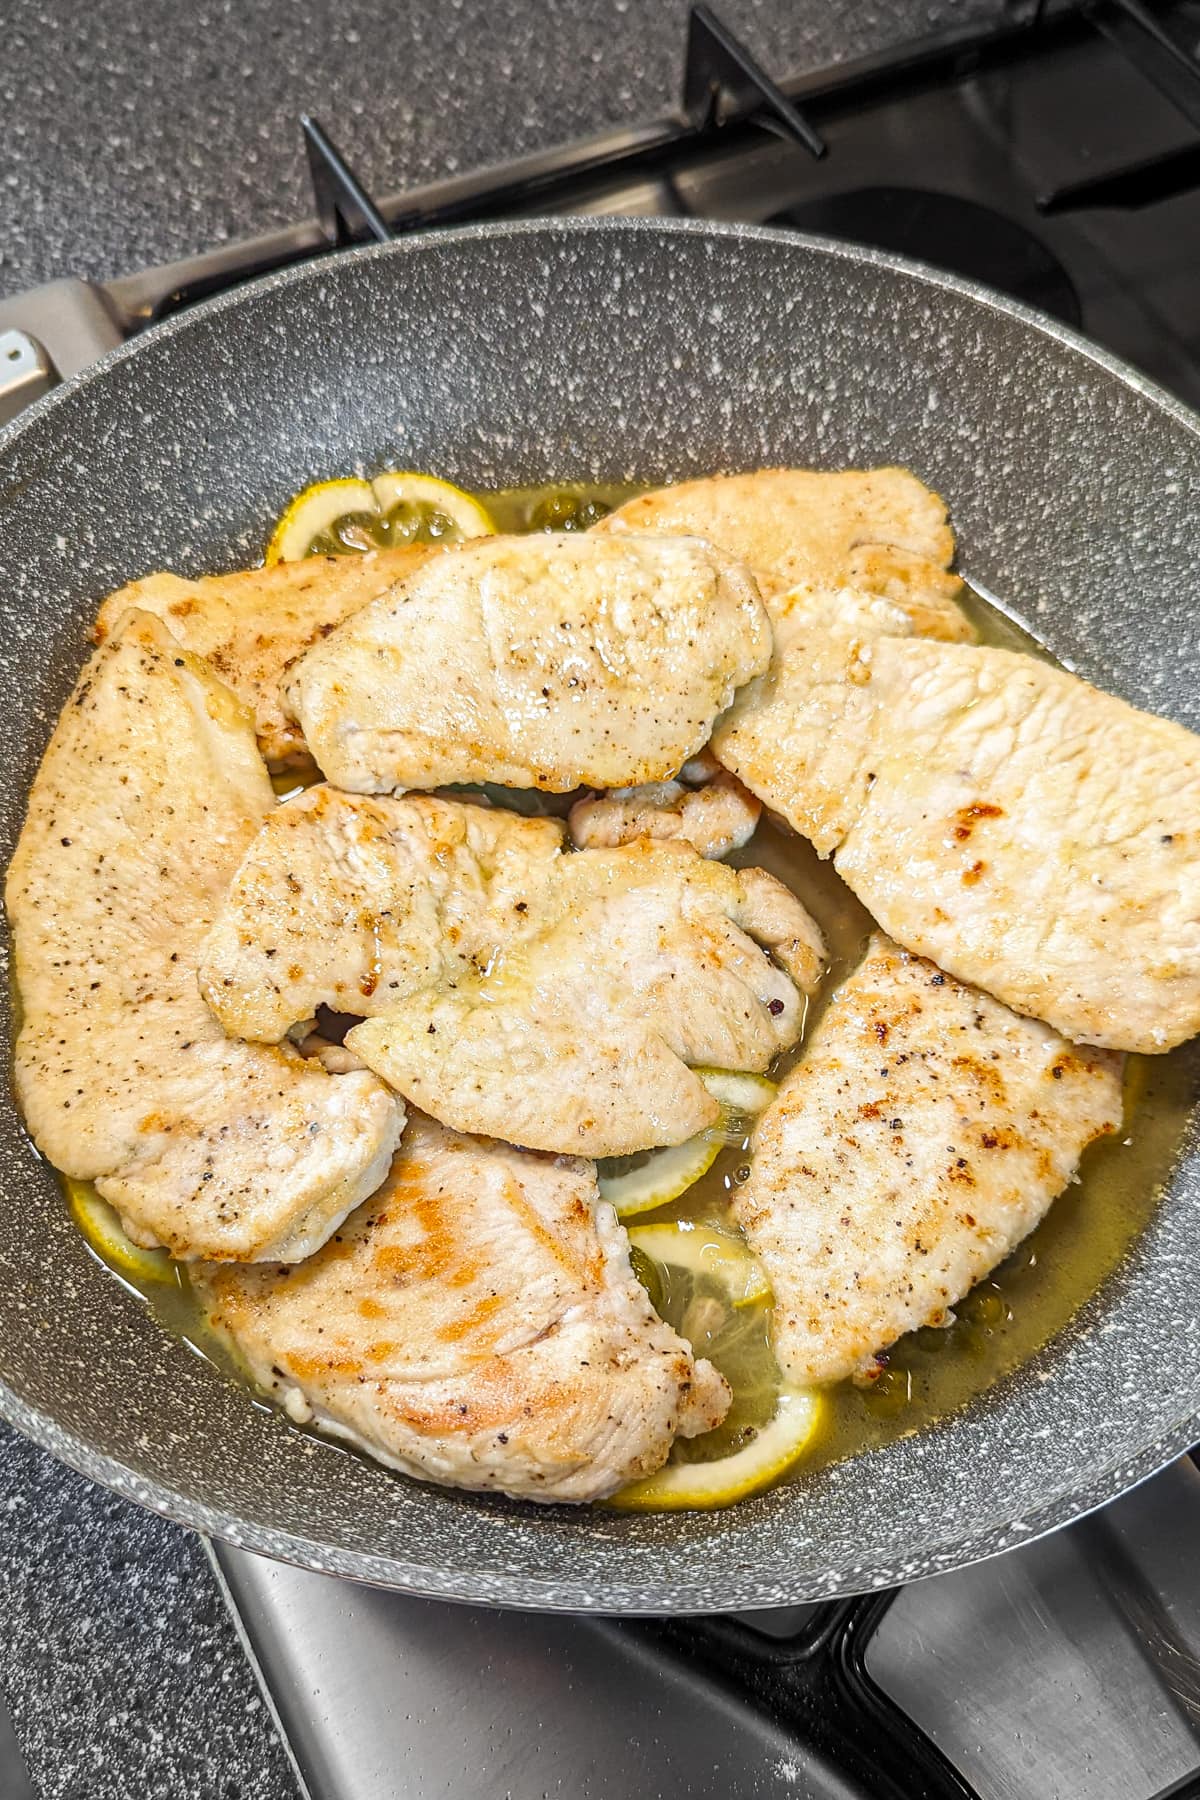 Sautéed chicken breasts in a frying pan, cooked to a golden-brown sear, bathed in a lemony sauce with slices of lemon.